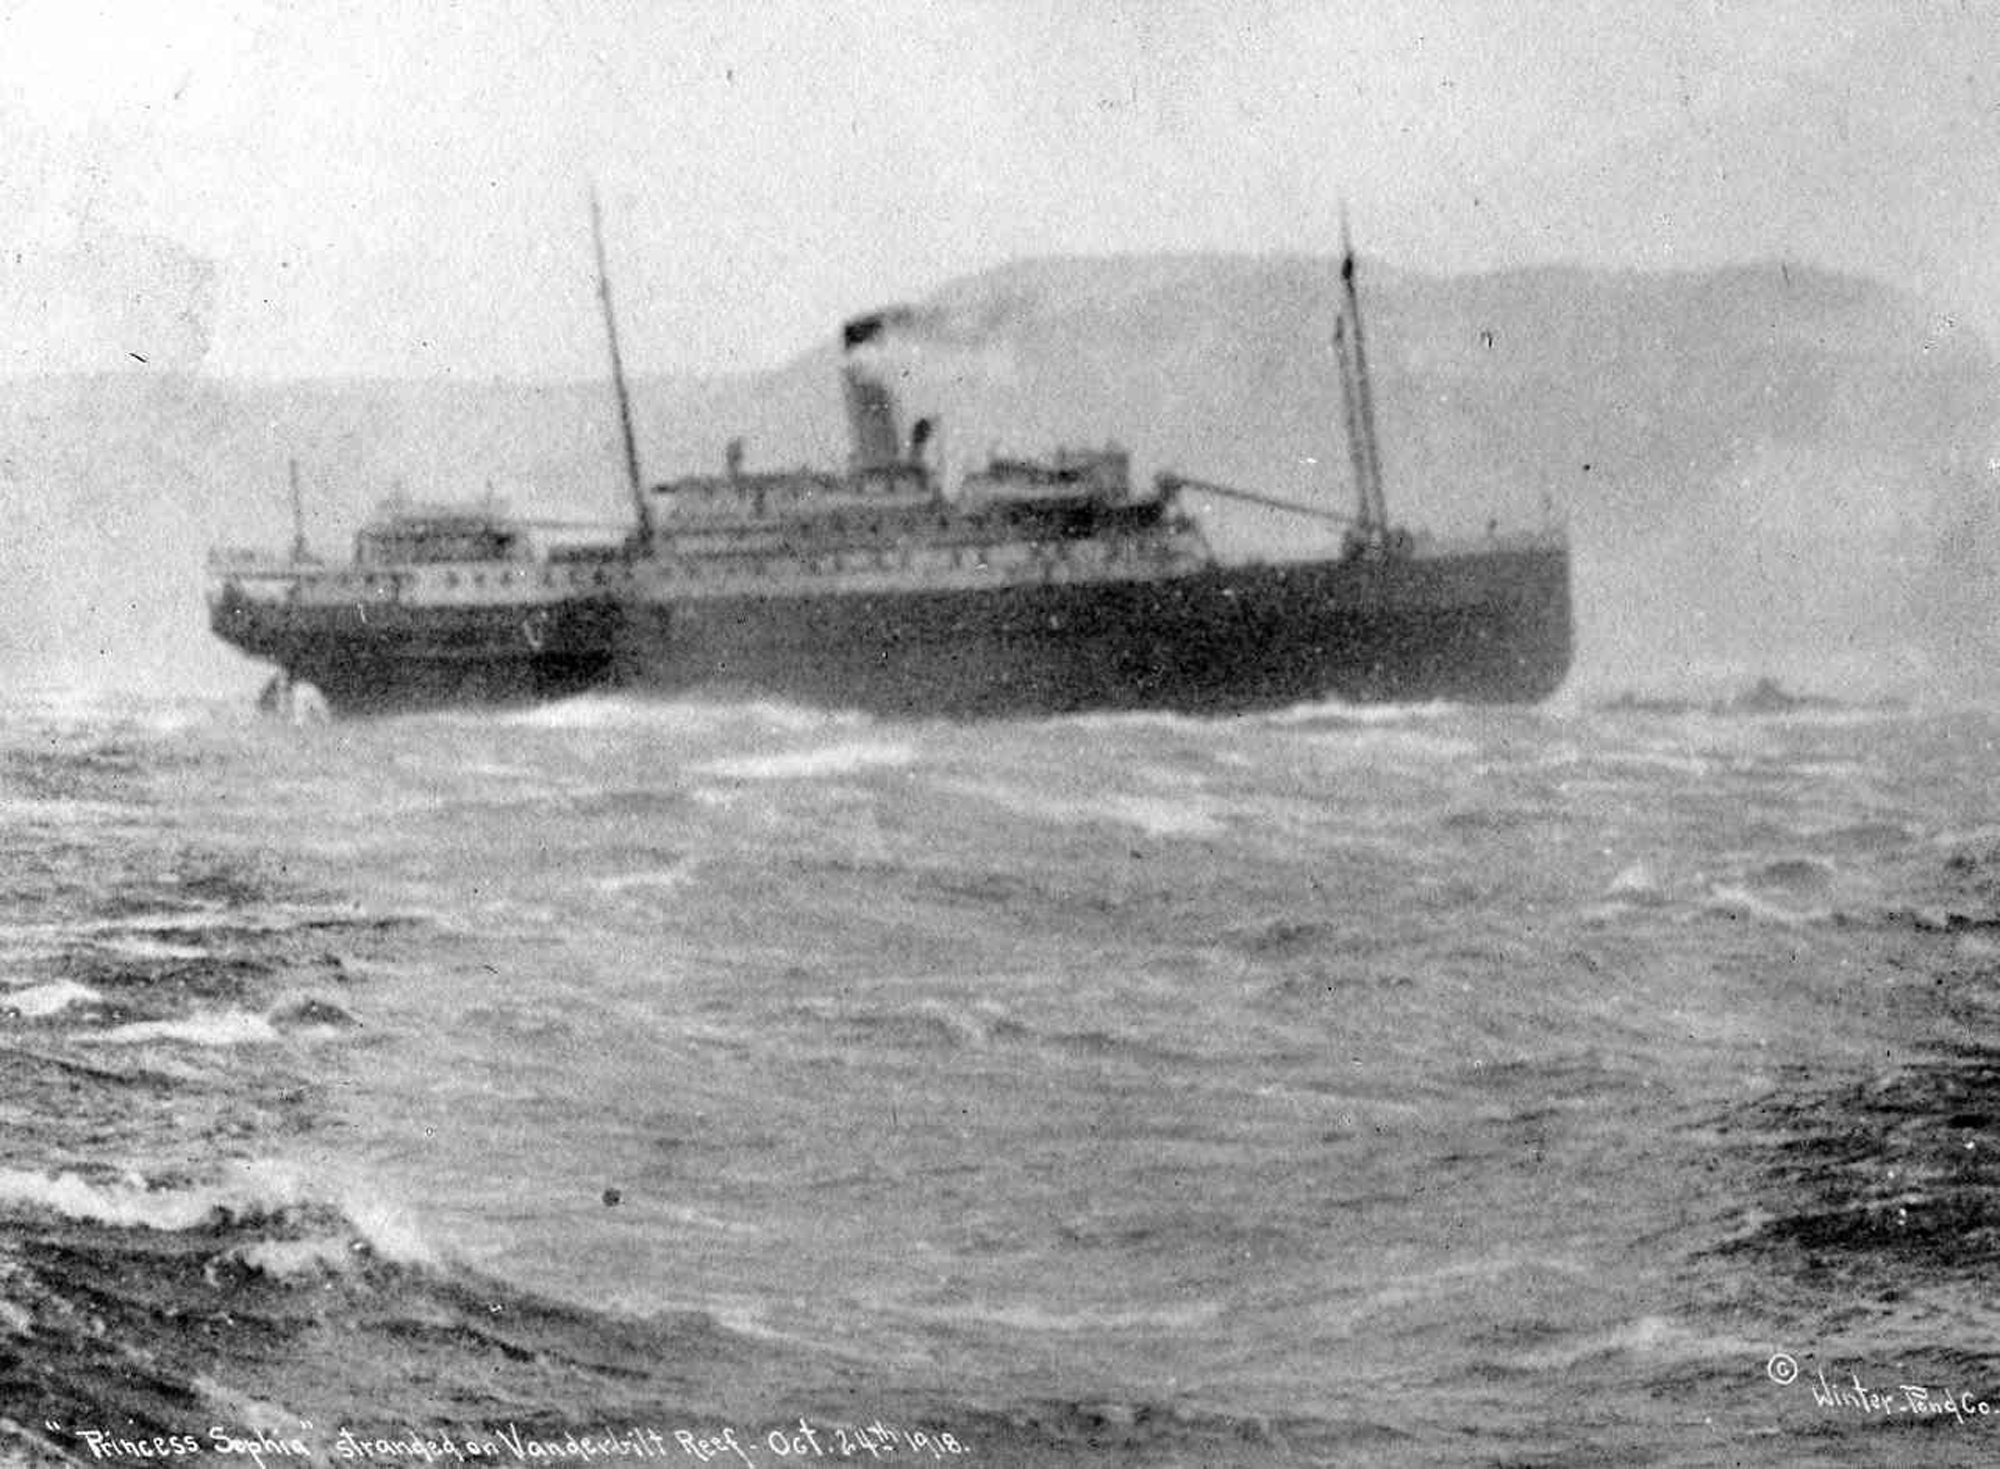 The SS Princess Sophia perched precariously on Vanderbilt Reef as the storm raged. (Courtesy Photo | Winter & Pond photo, Alaska Historical Library)